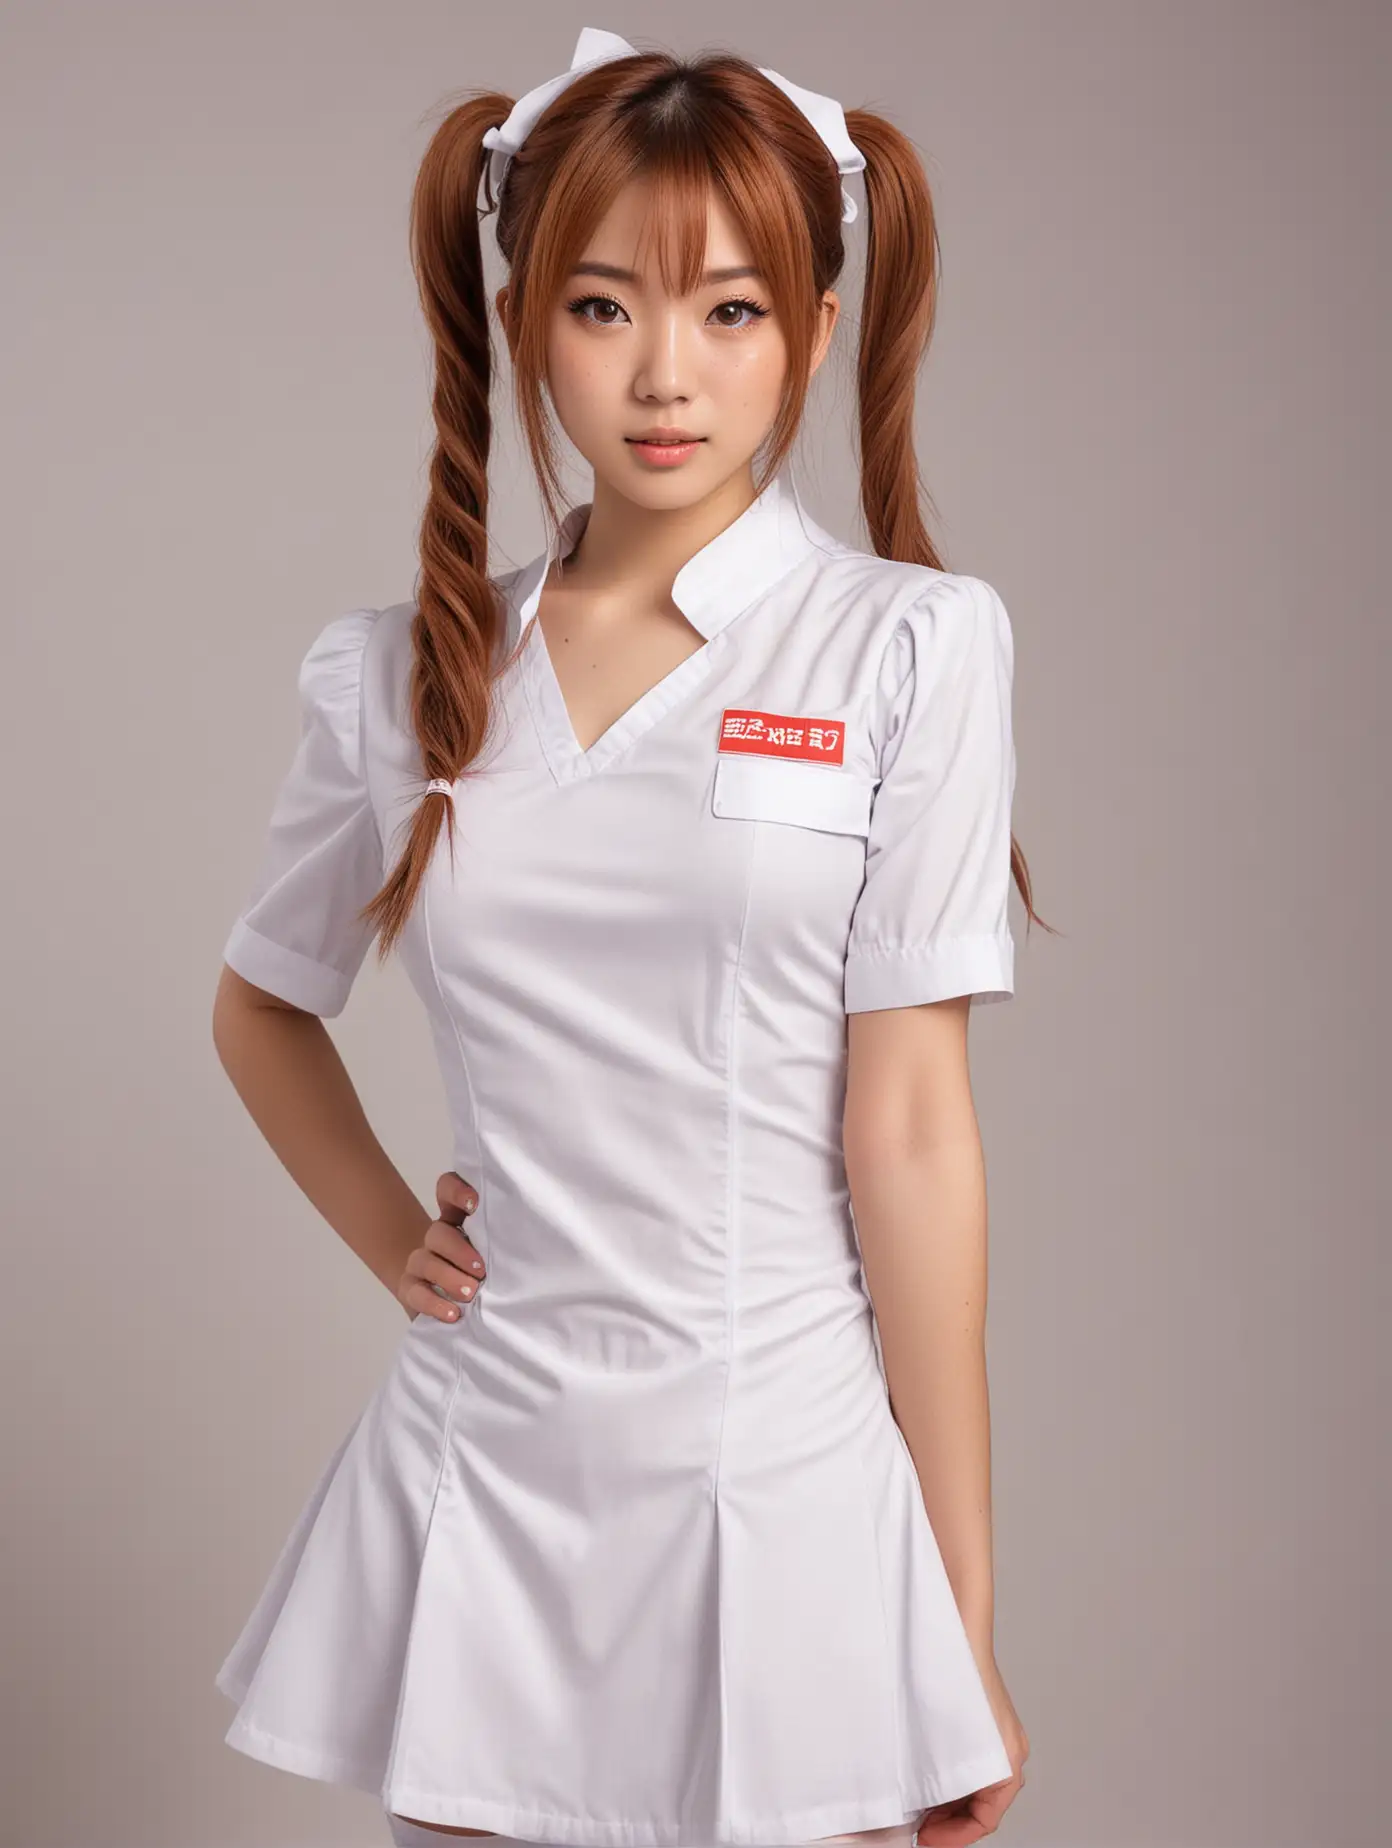 Fullbody Japanese girl with caramel-colored medium length hair, freckles and huge amber eyes. Posing with sexy nurse costume with pigtails.